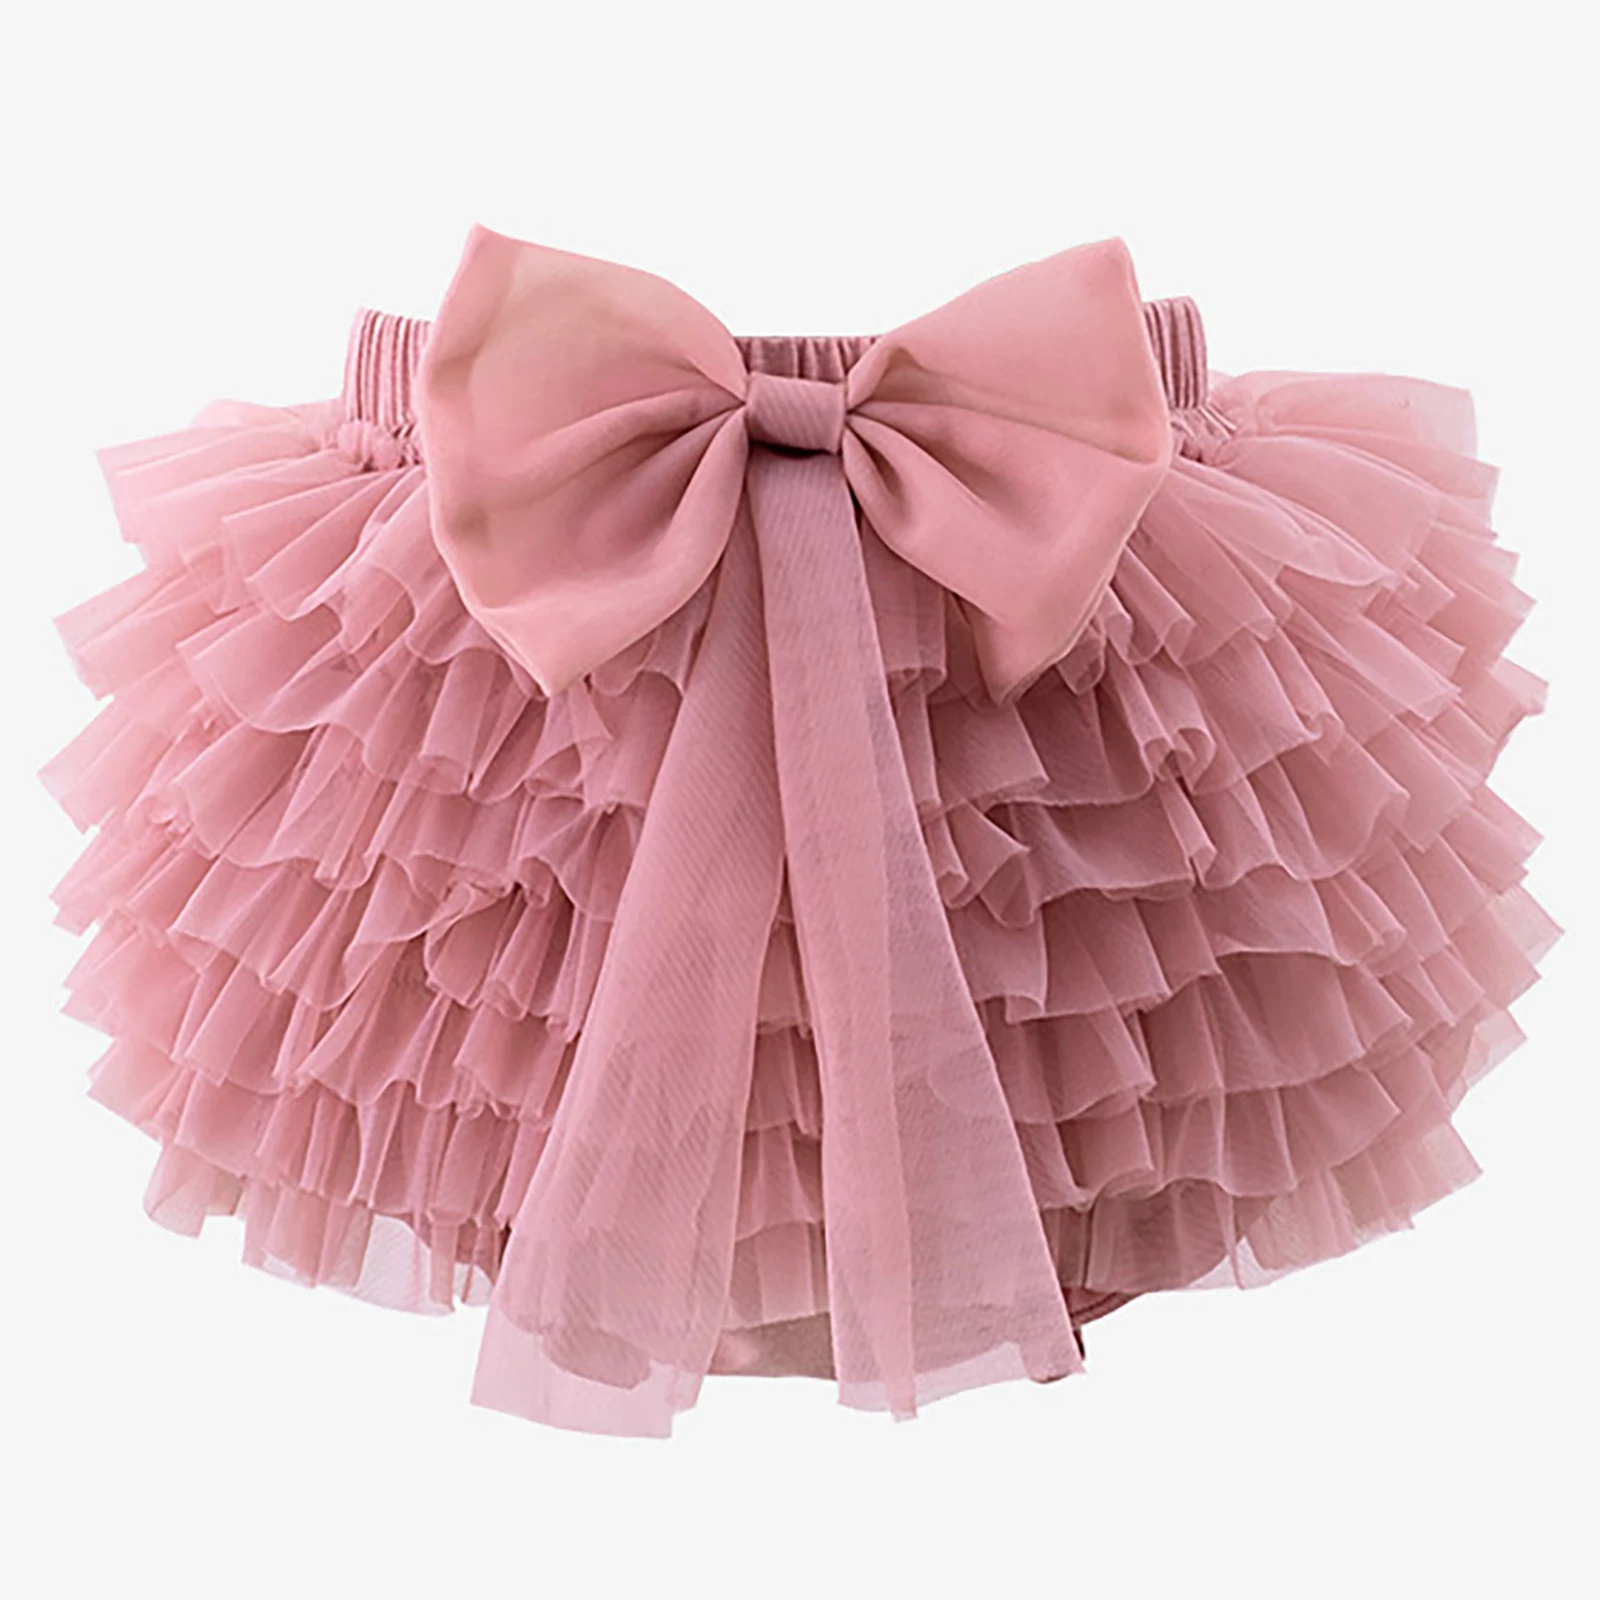 

ZDHoor Infant Girl Princess Dresses Tulle Tutu Skirt with Bow Elastic Waistband Layered Dress Ruffled Diaper Cover Shorts